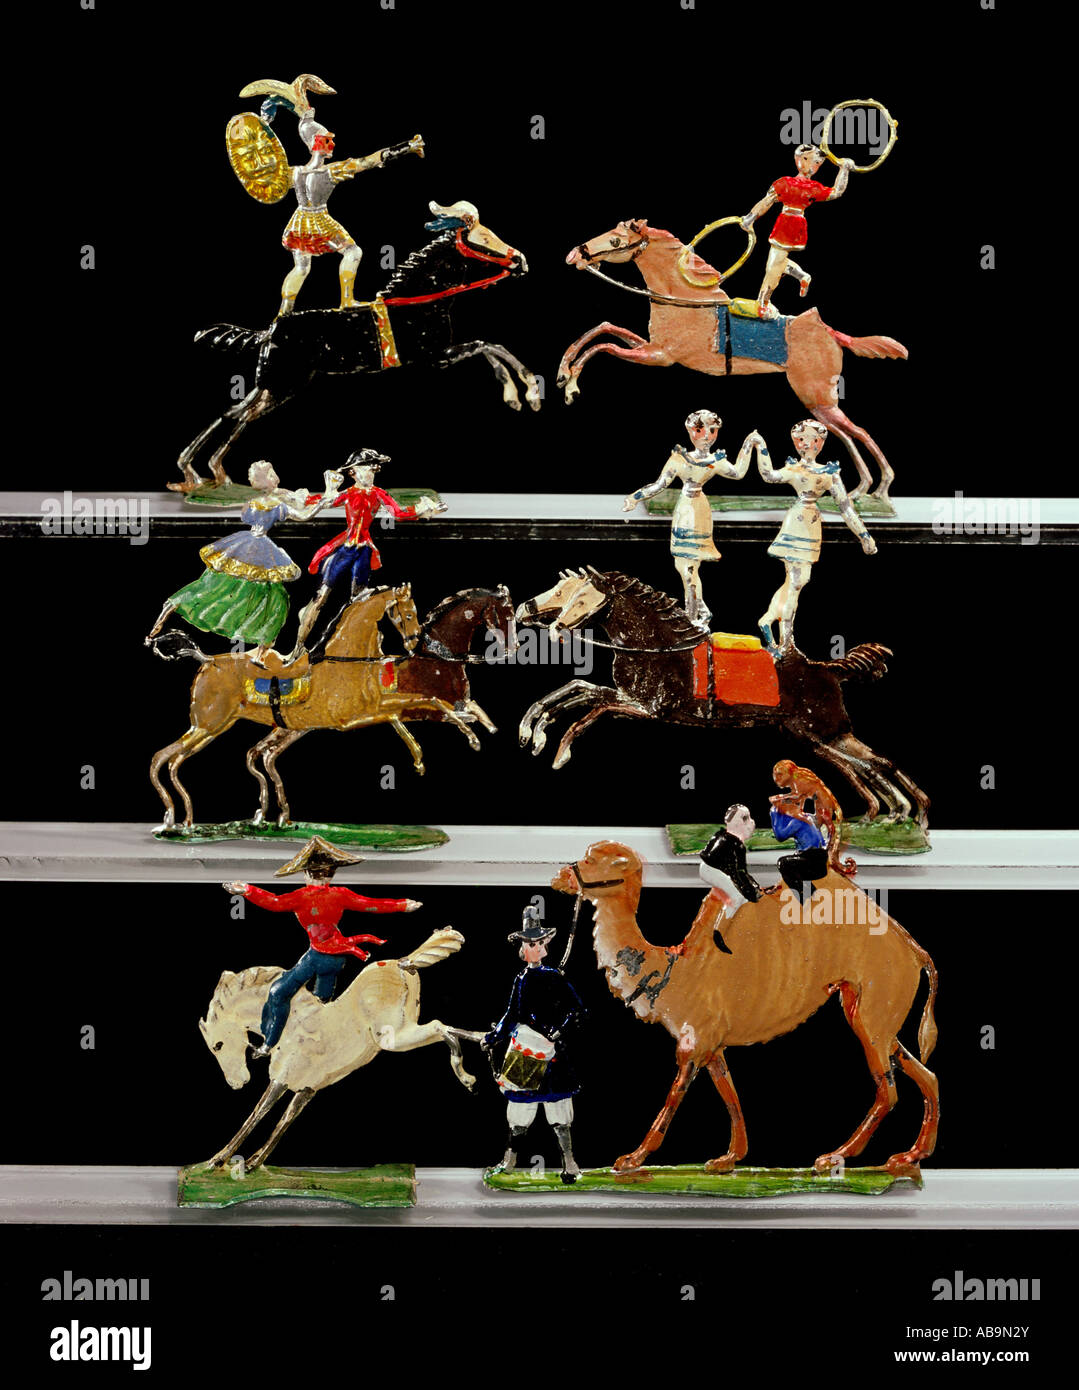 Camel master and hi-res photography images stock Alamy 